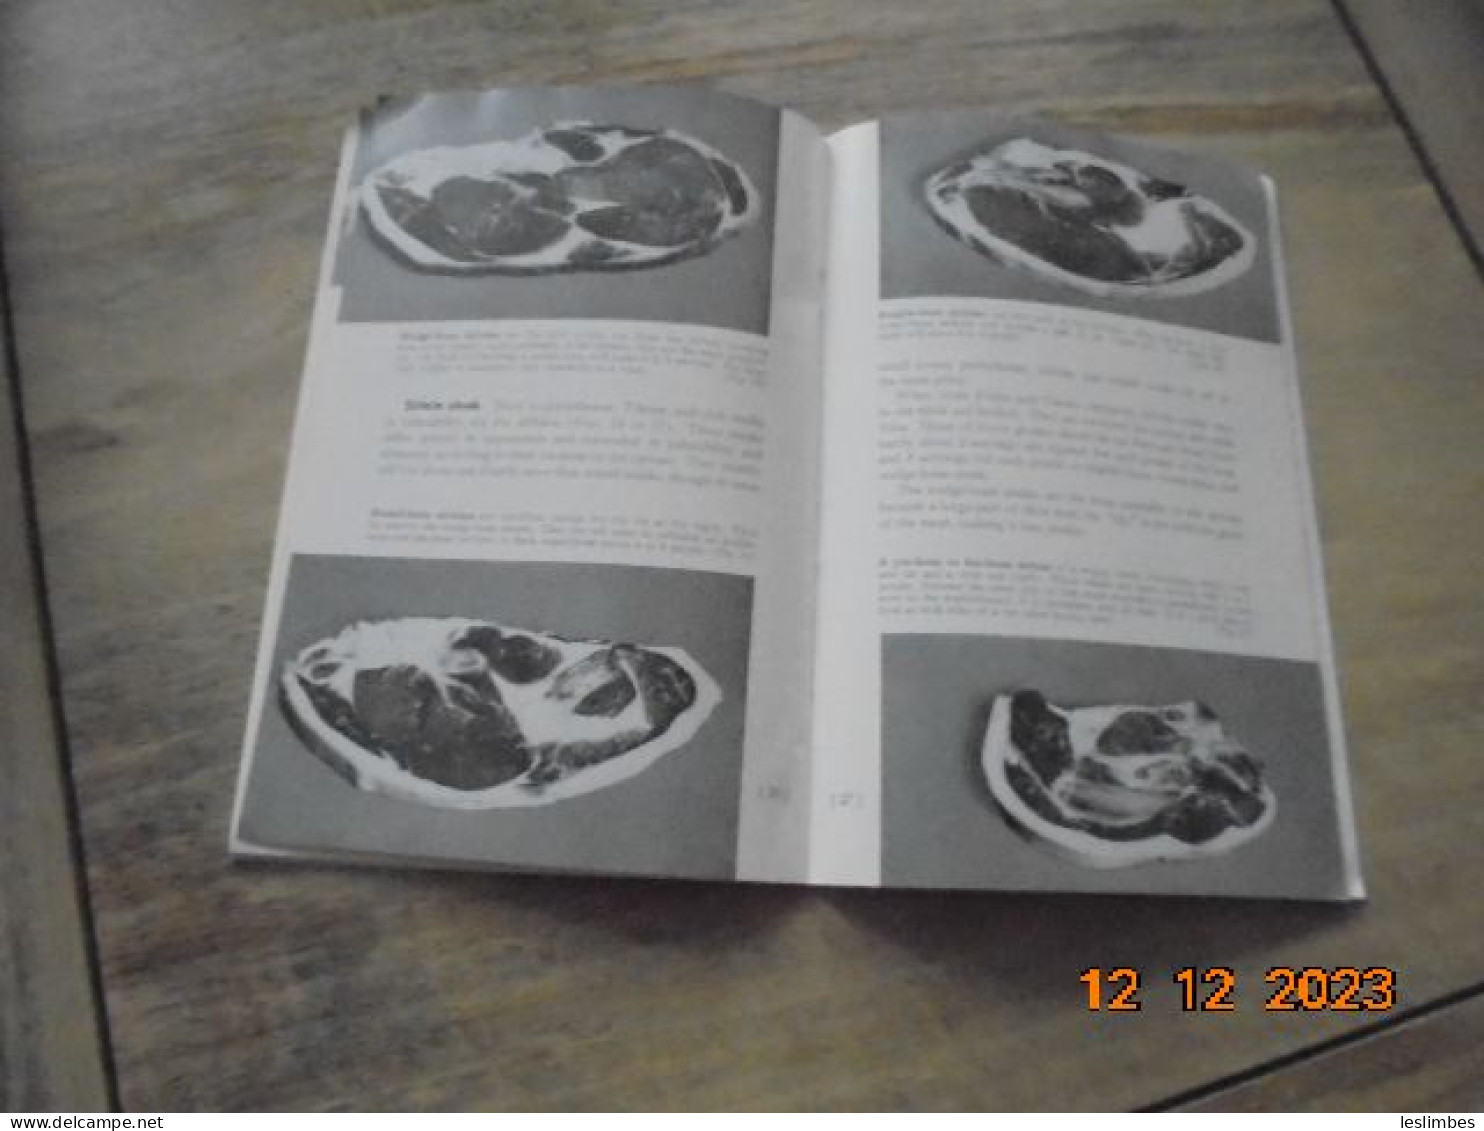 Beef For The Table : How To Select It, How To Use It (Cricular 585) - Burdette Breidenstein And Sleeter Bull 1959 - Américaine